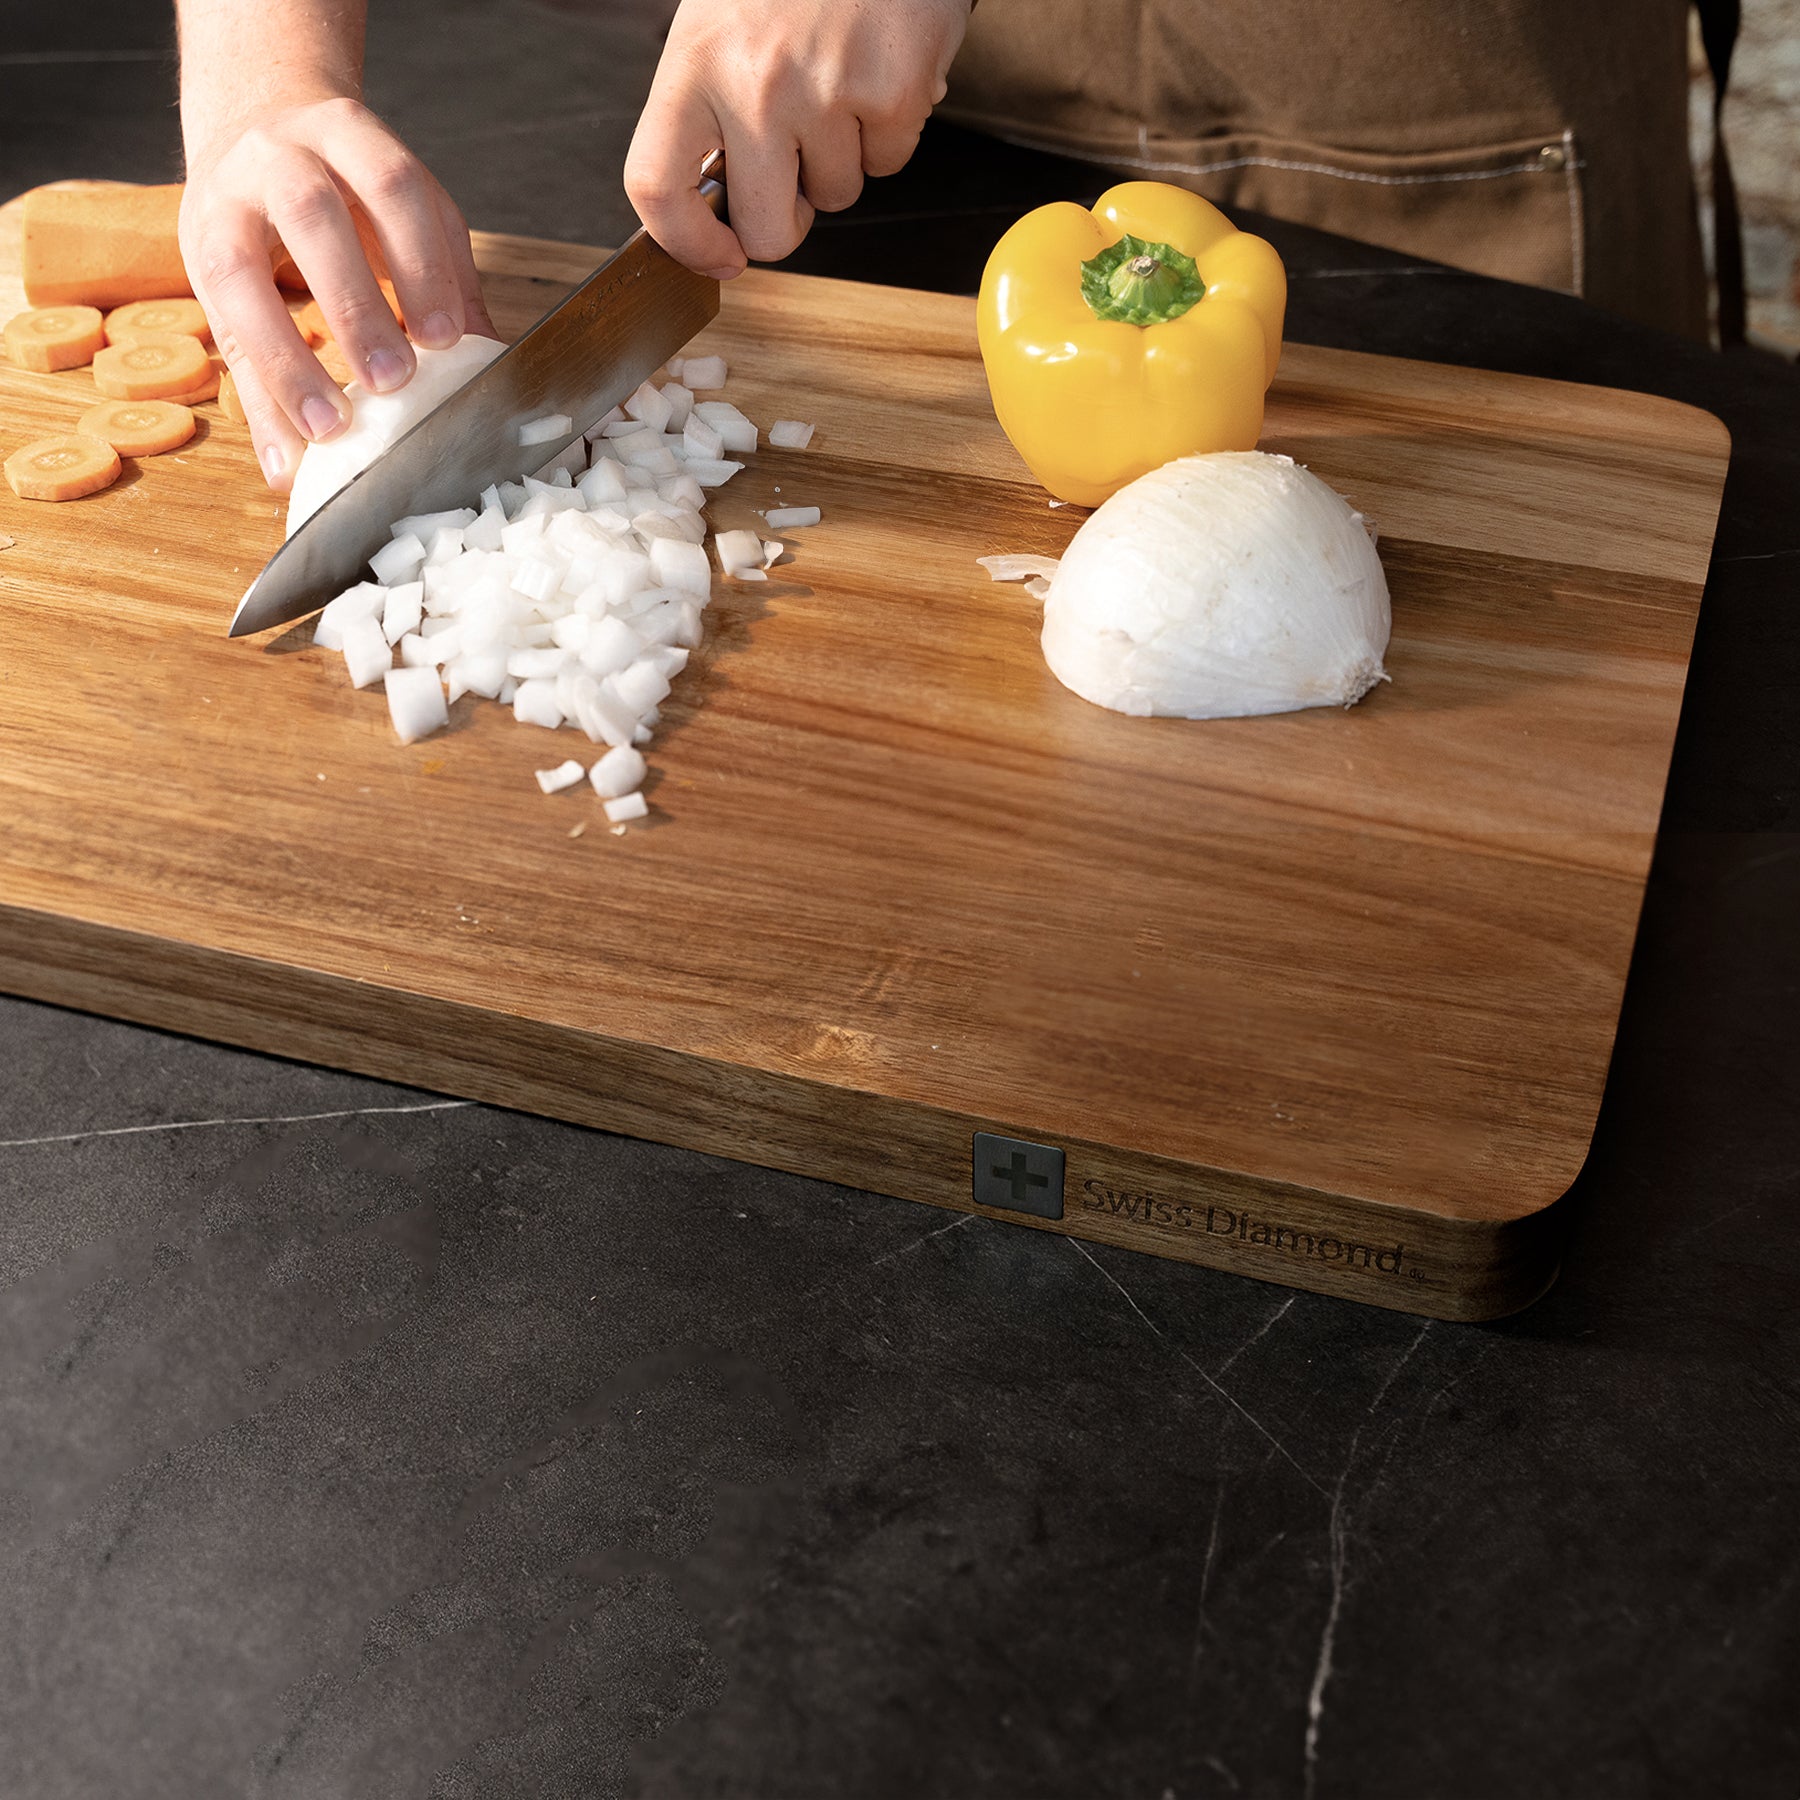 24" Acacia Wood Cutting Board at an angle in use food being chopped on surface